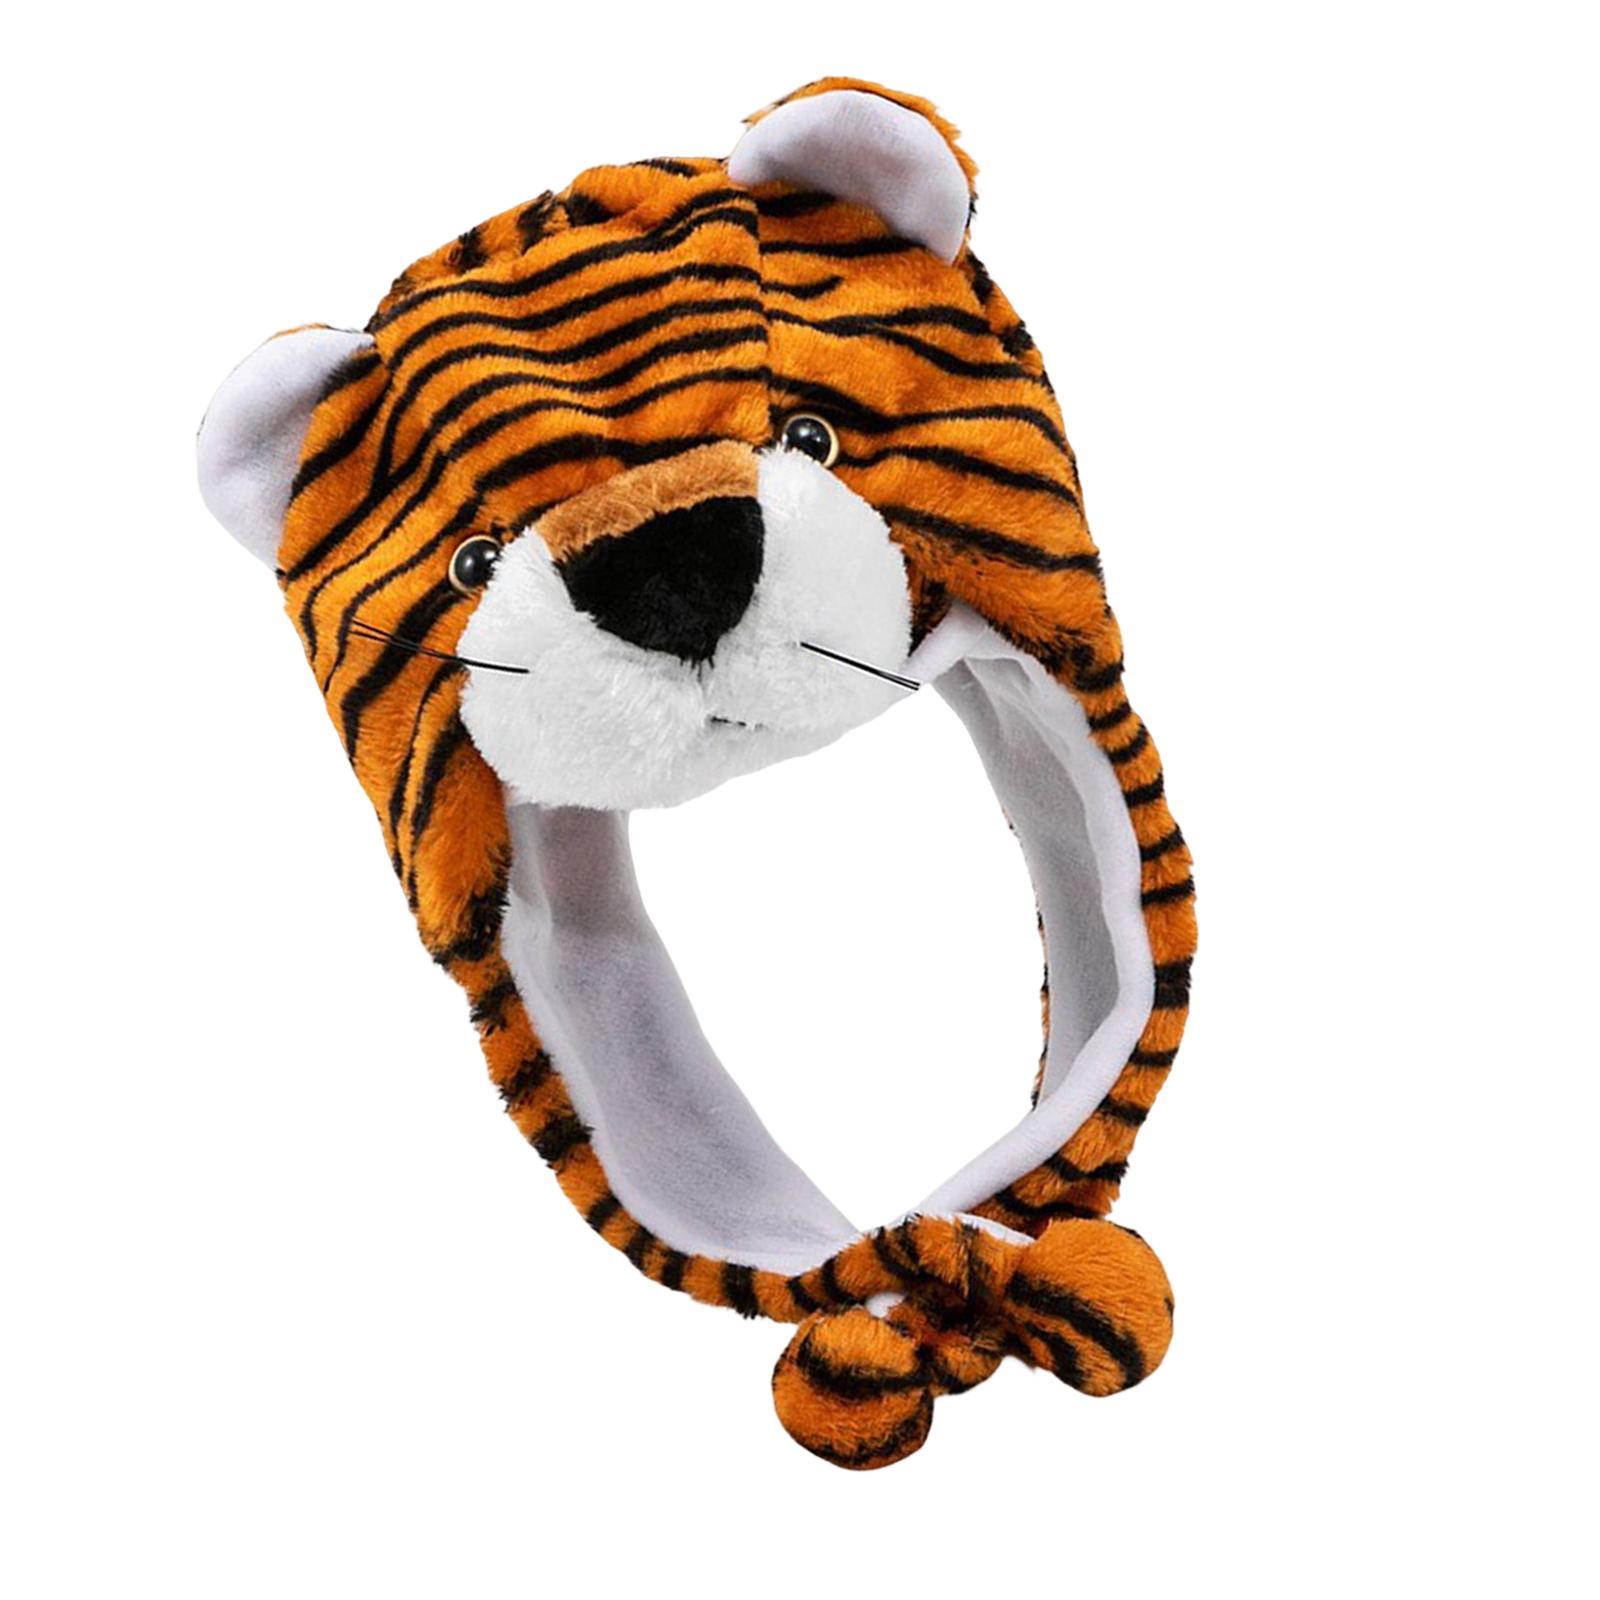 Funny Tiger Plush Hat Stuffed Cap Headgear Performing Props Pillow Toy Novelty Headcover Cosplay Costume Accessories for Party Kids Girls